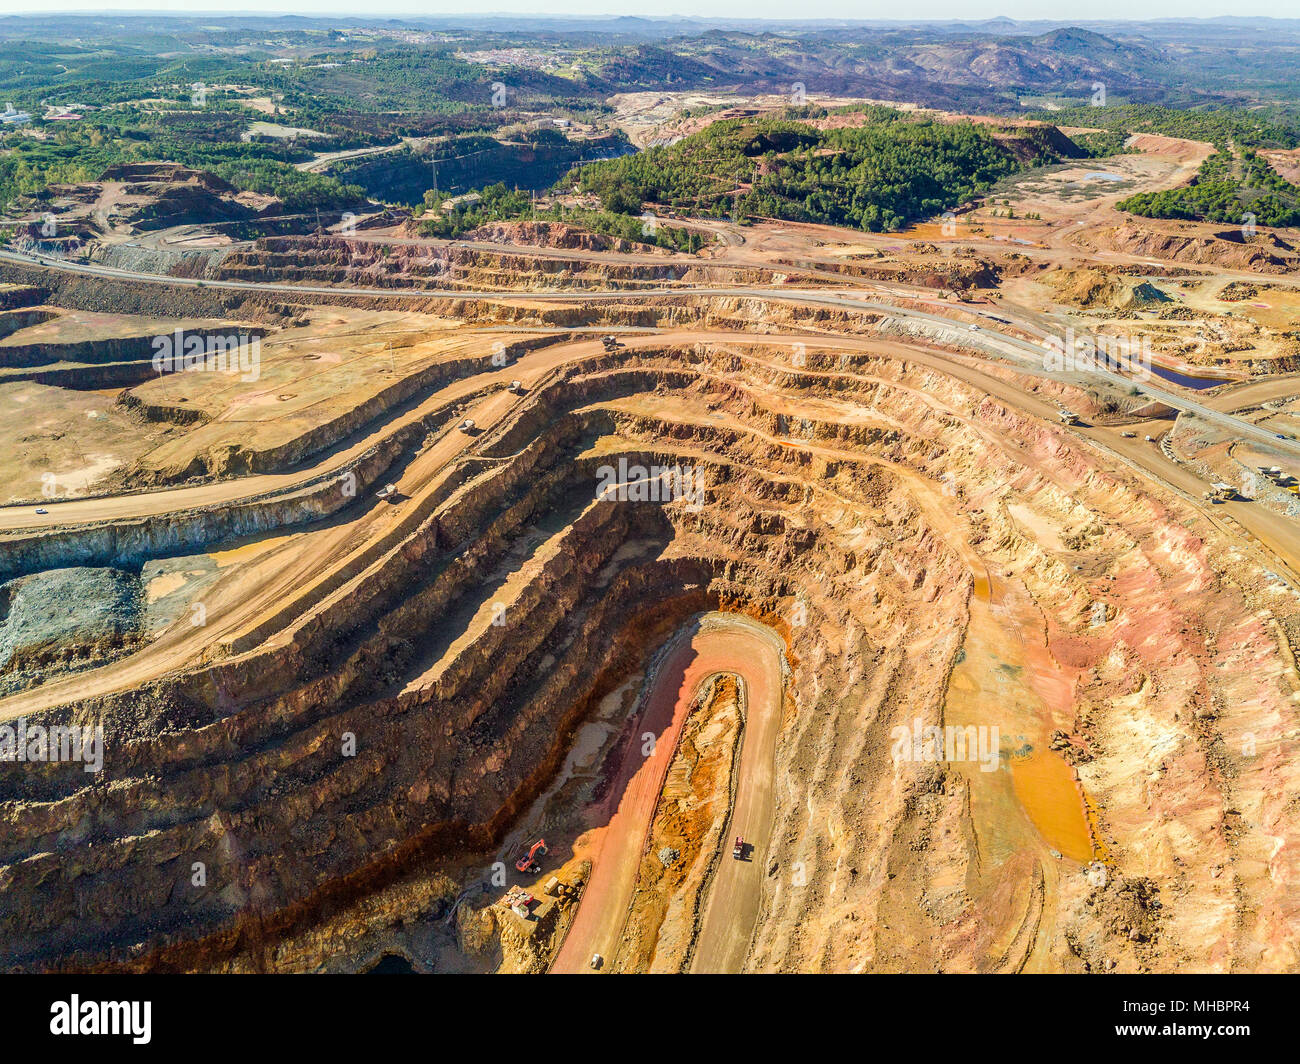 Aerial view of open pit mine, Minas de Riotinto, Andalusia, Spain Stock Photo